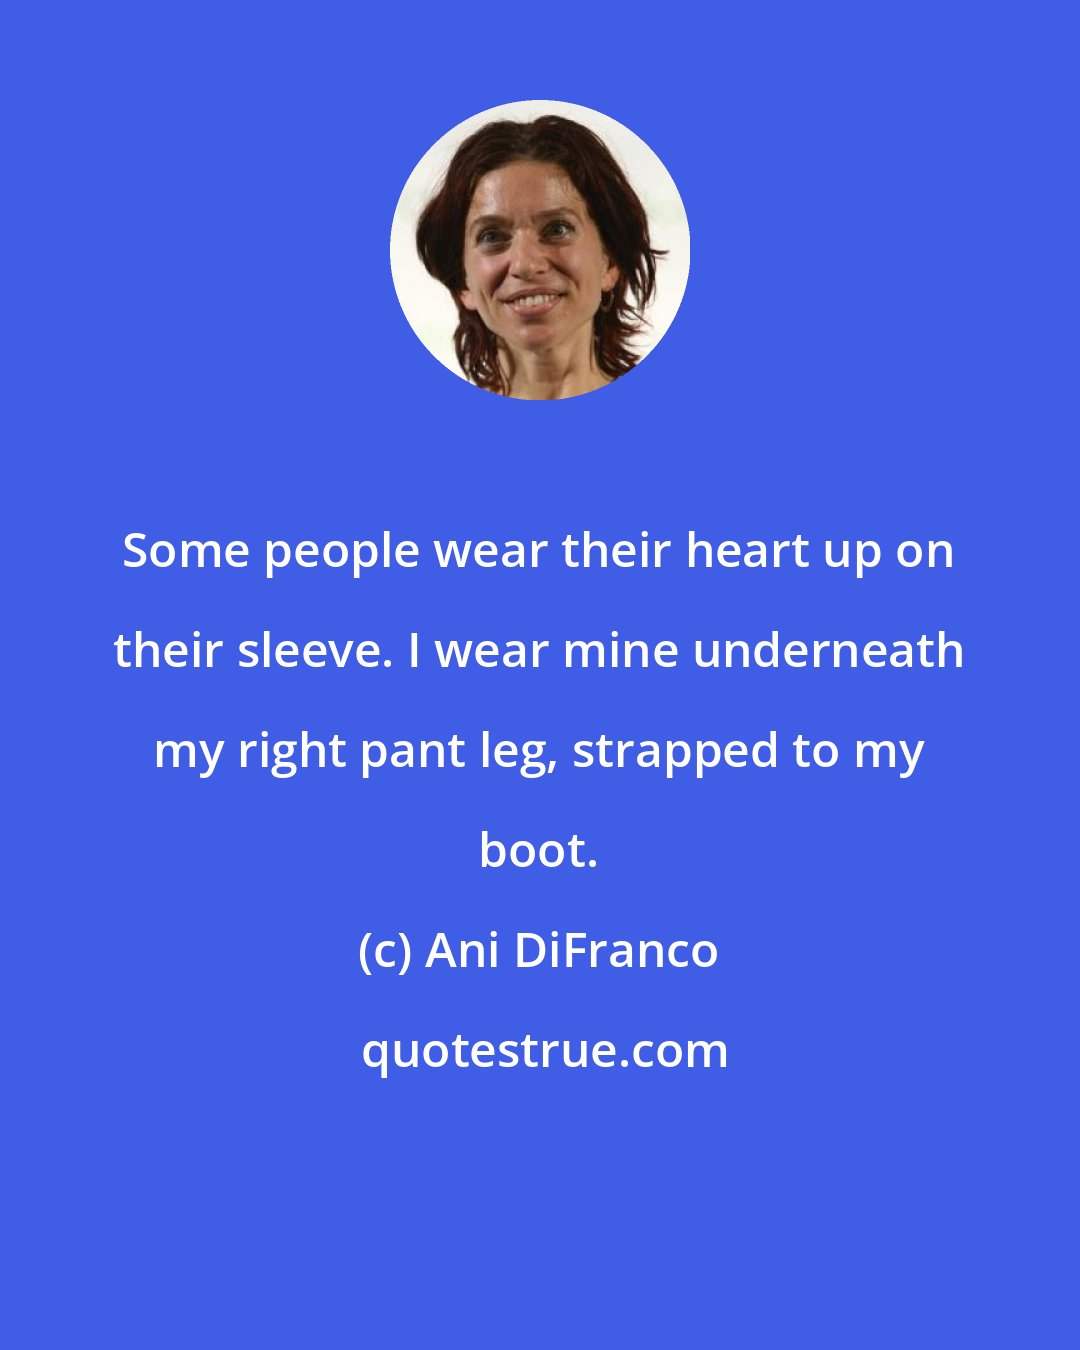 Ani DiFranco: Some people wear their heart up on their sleeve. I wear mine underneath my right pant leg, strapped to my boot.